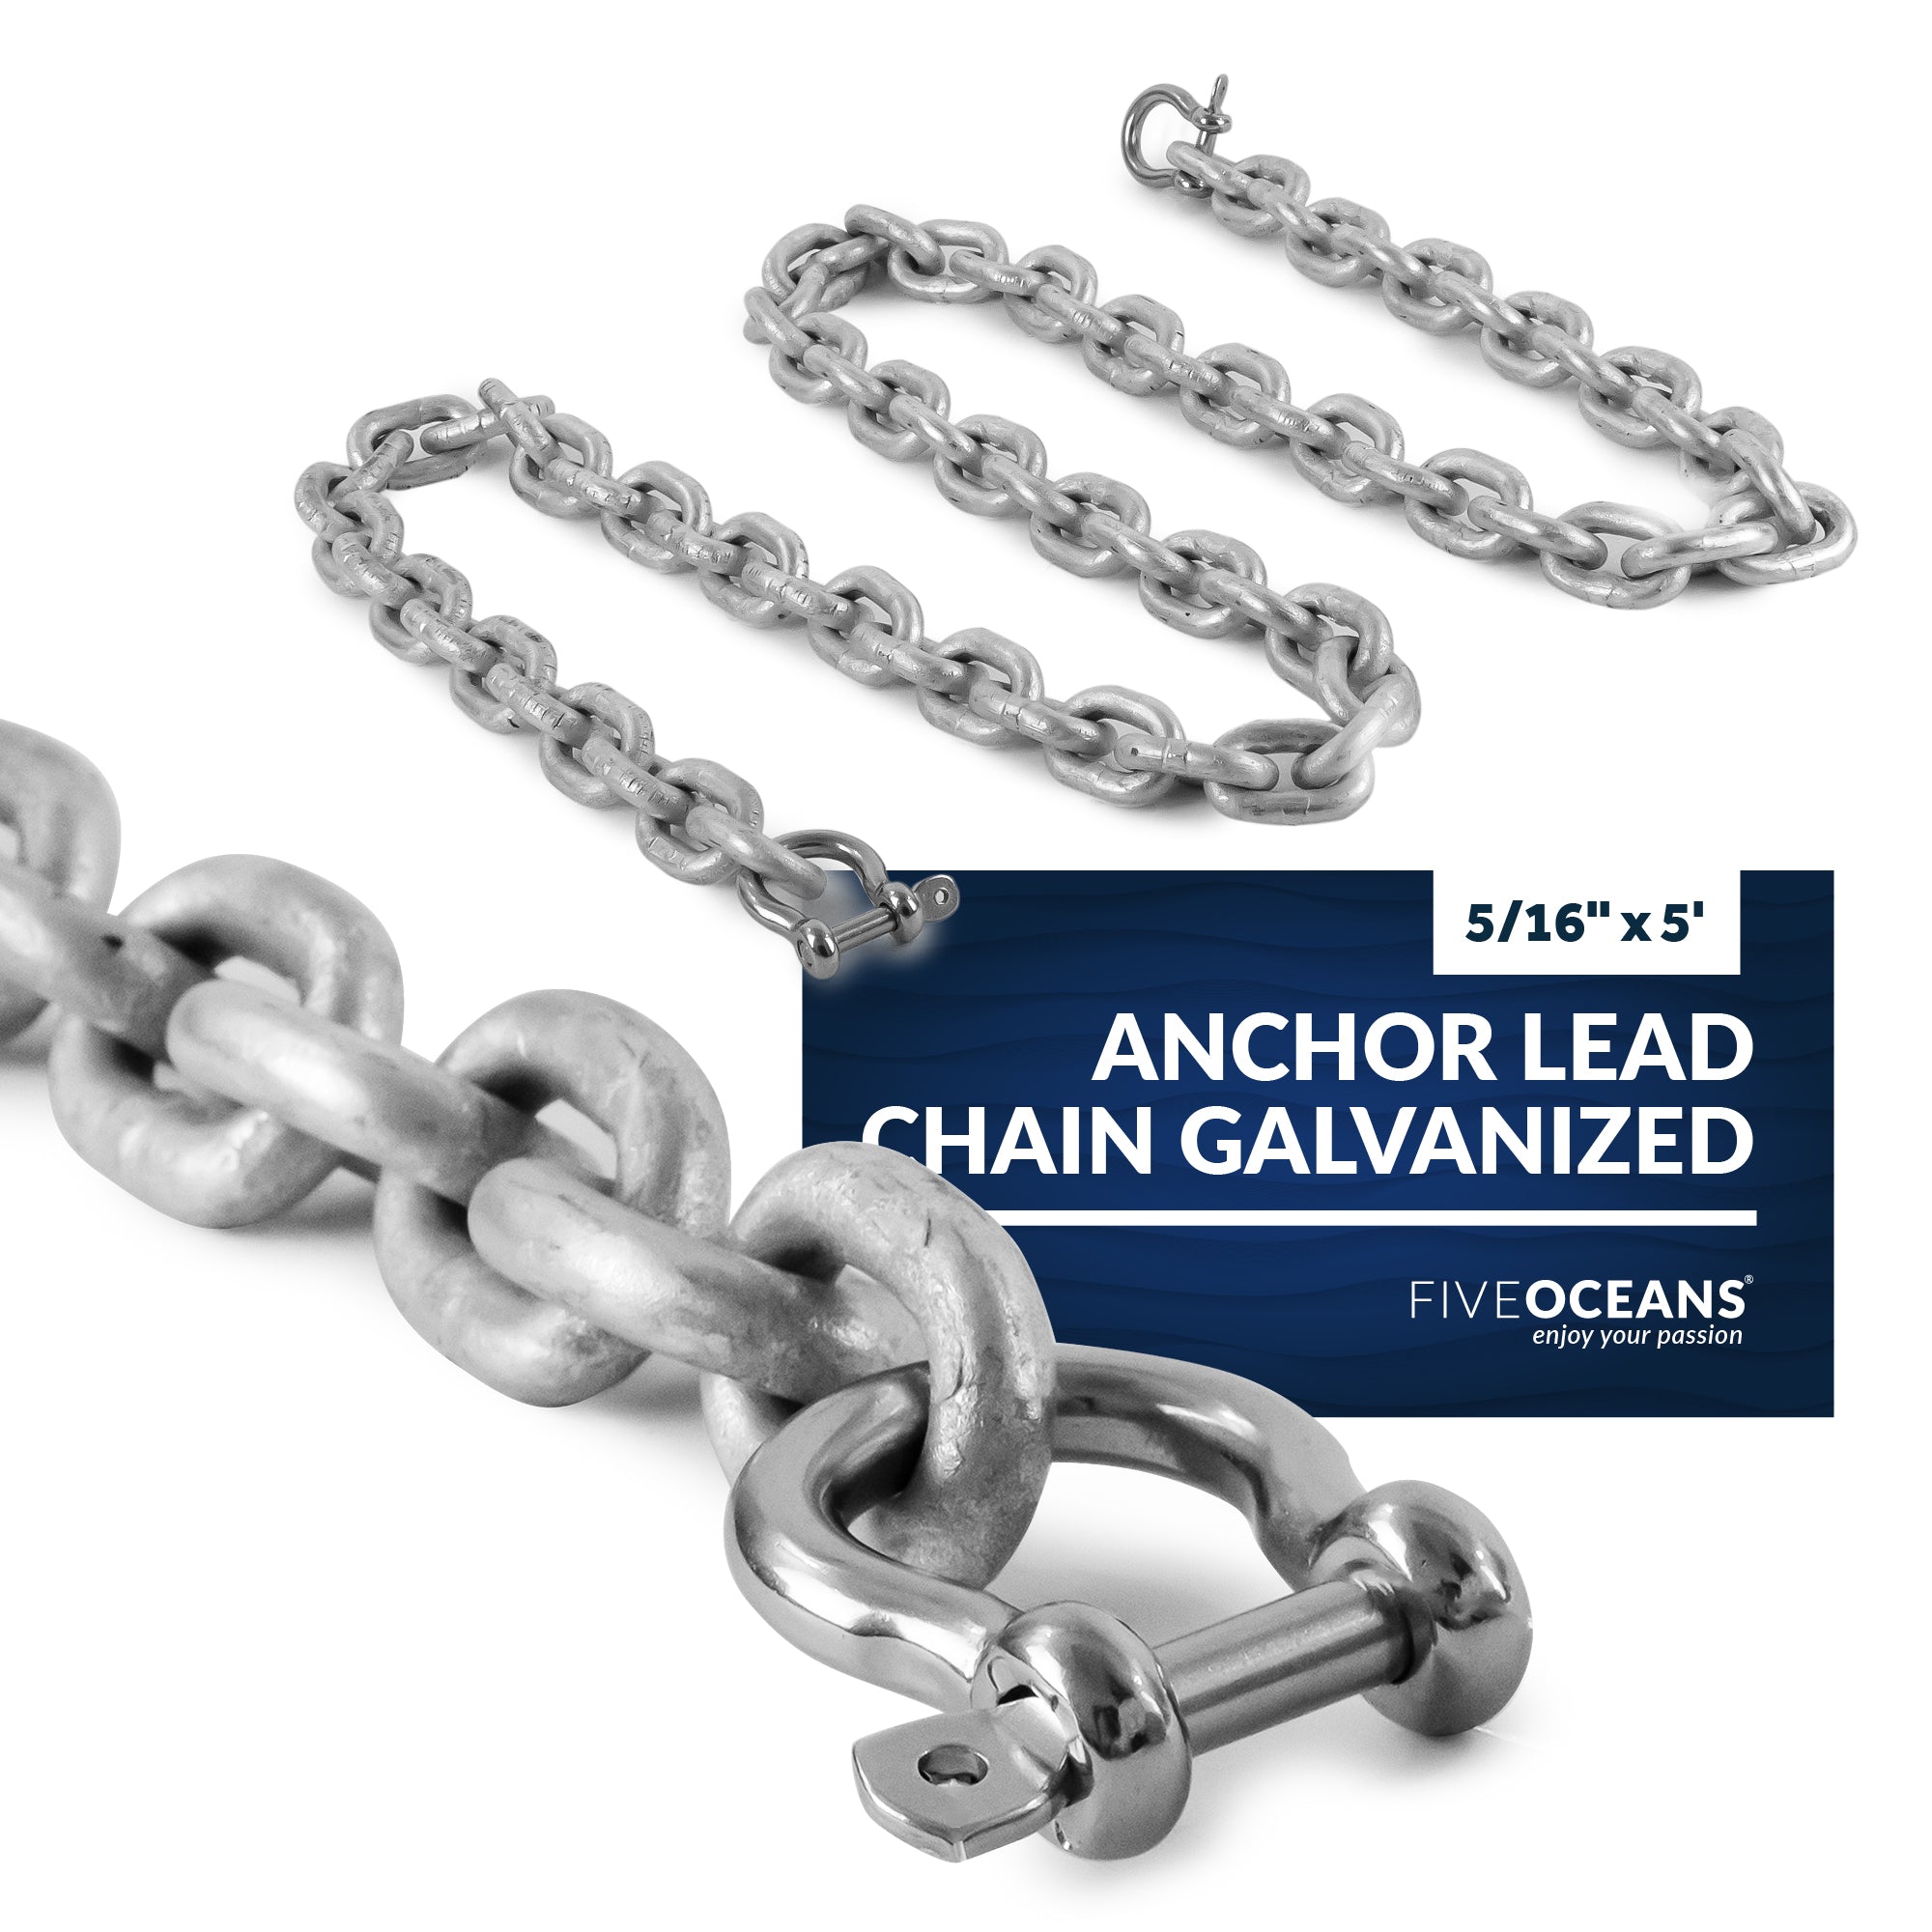 Boat Anchor Lead Chain with Shackles, 5/16 x 5', HTG4 Galvanized Steel - FO4490-G5